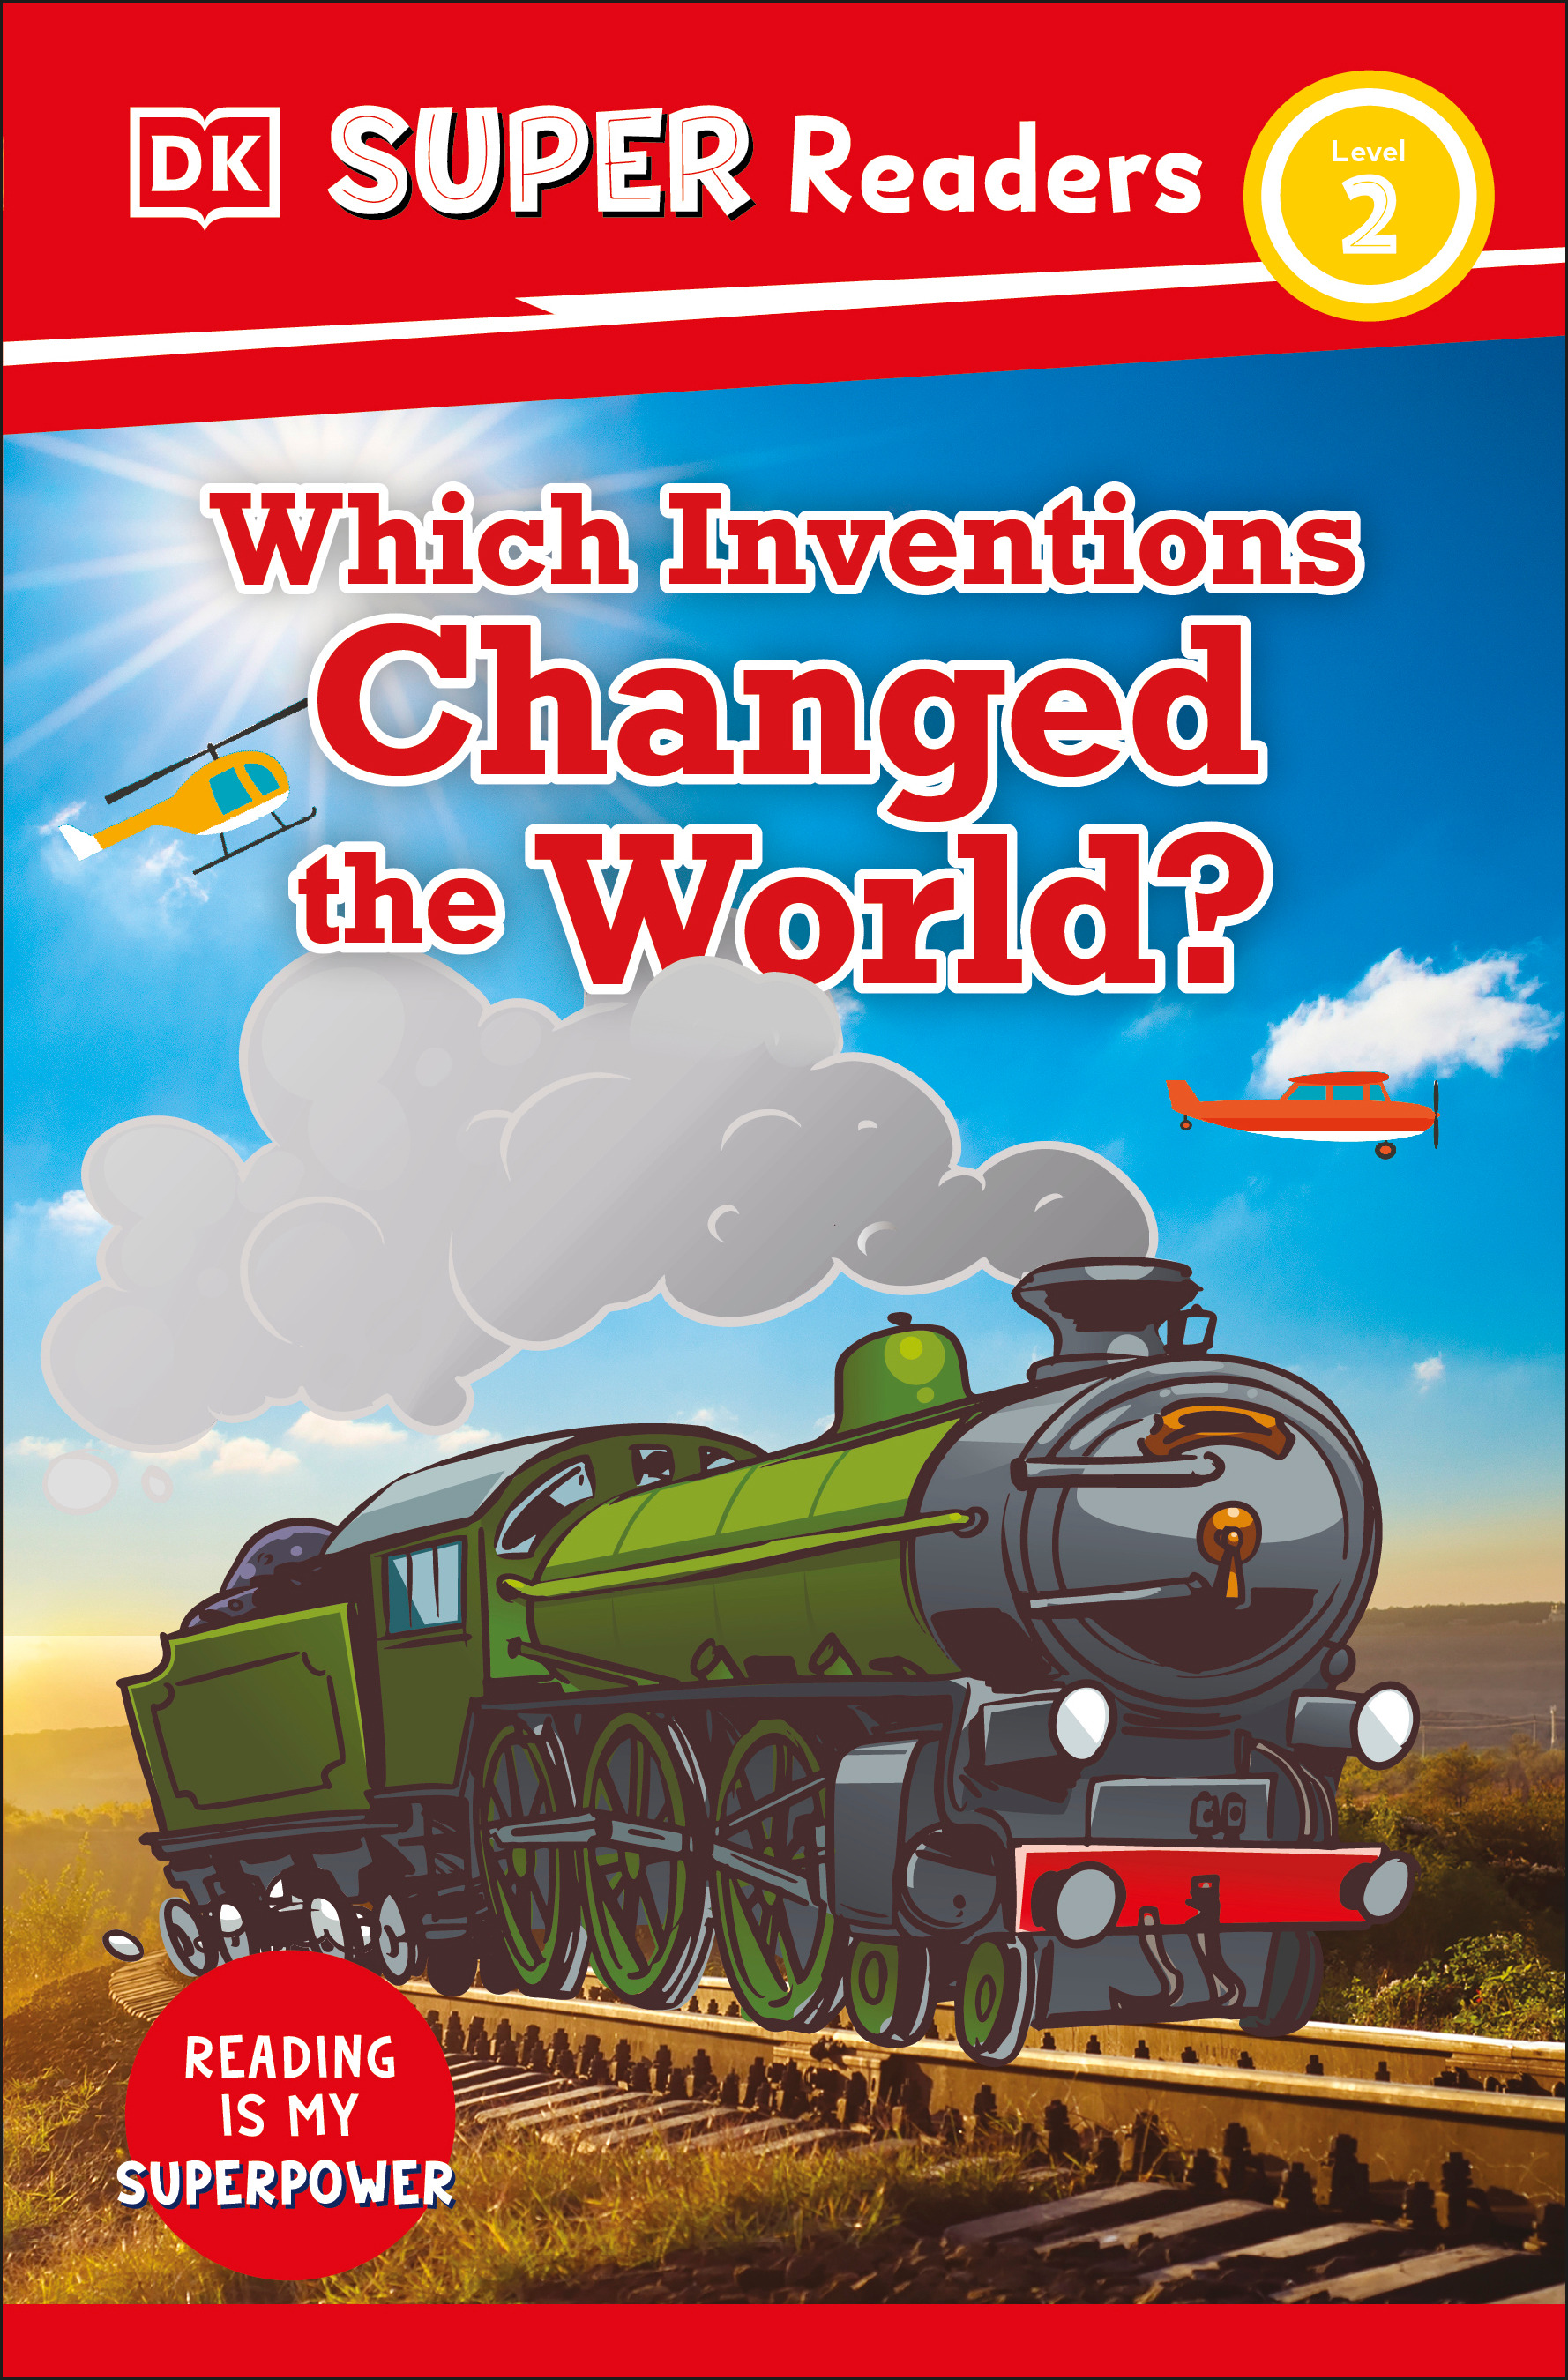 DK Super Readers Level 2 Which Inventions Changed the World? | 